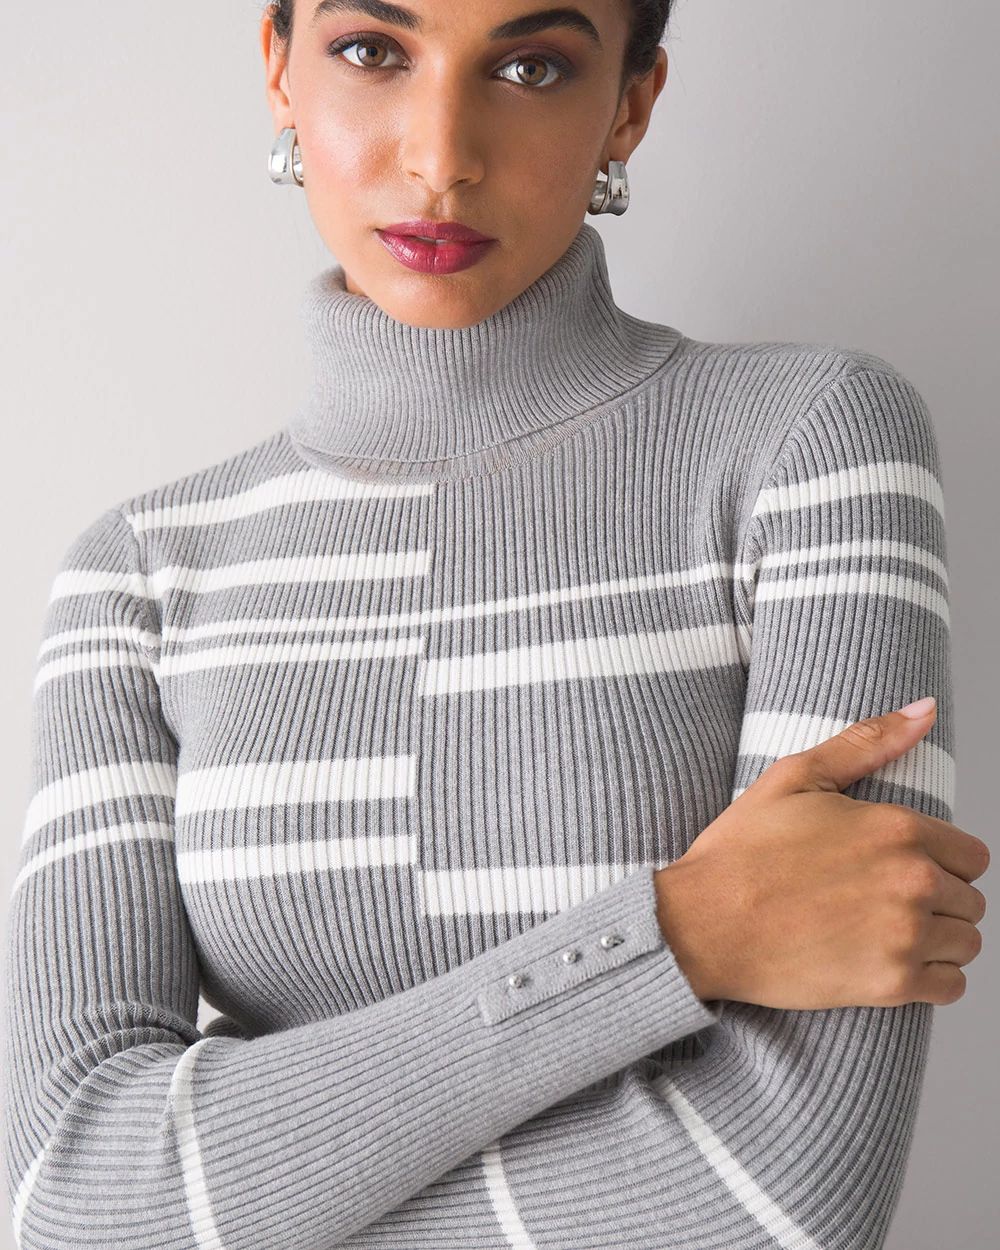 Long-Sleeve Ribbed Colorblock Turtleneck click to view larger image.